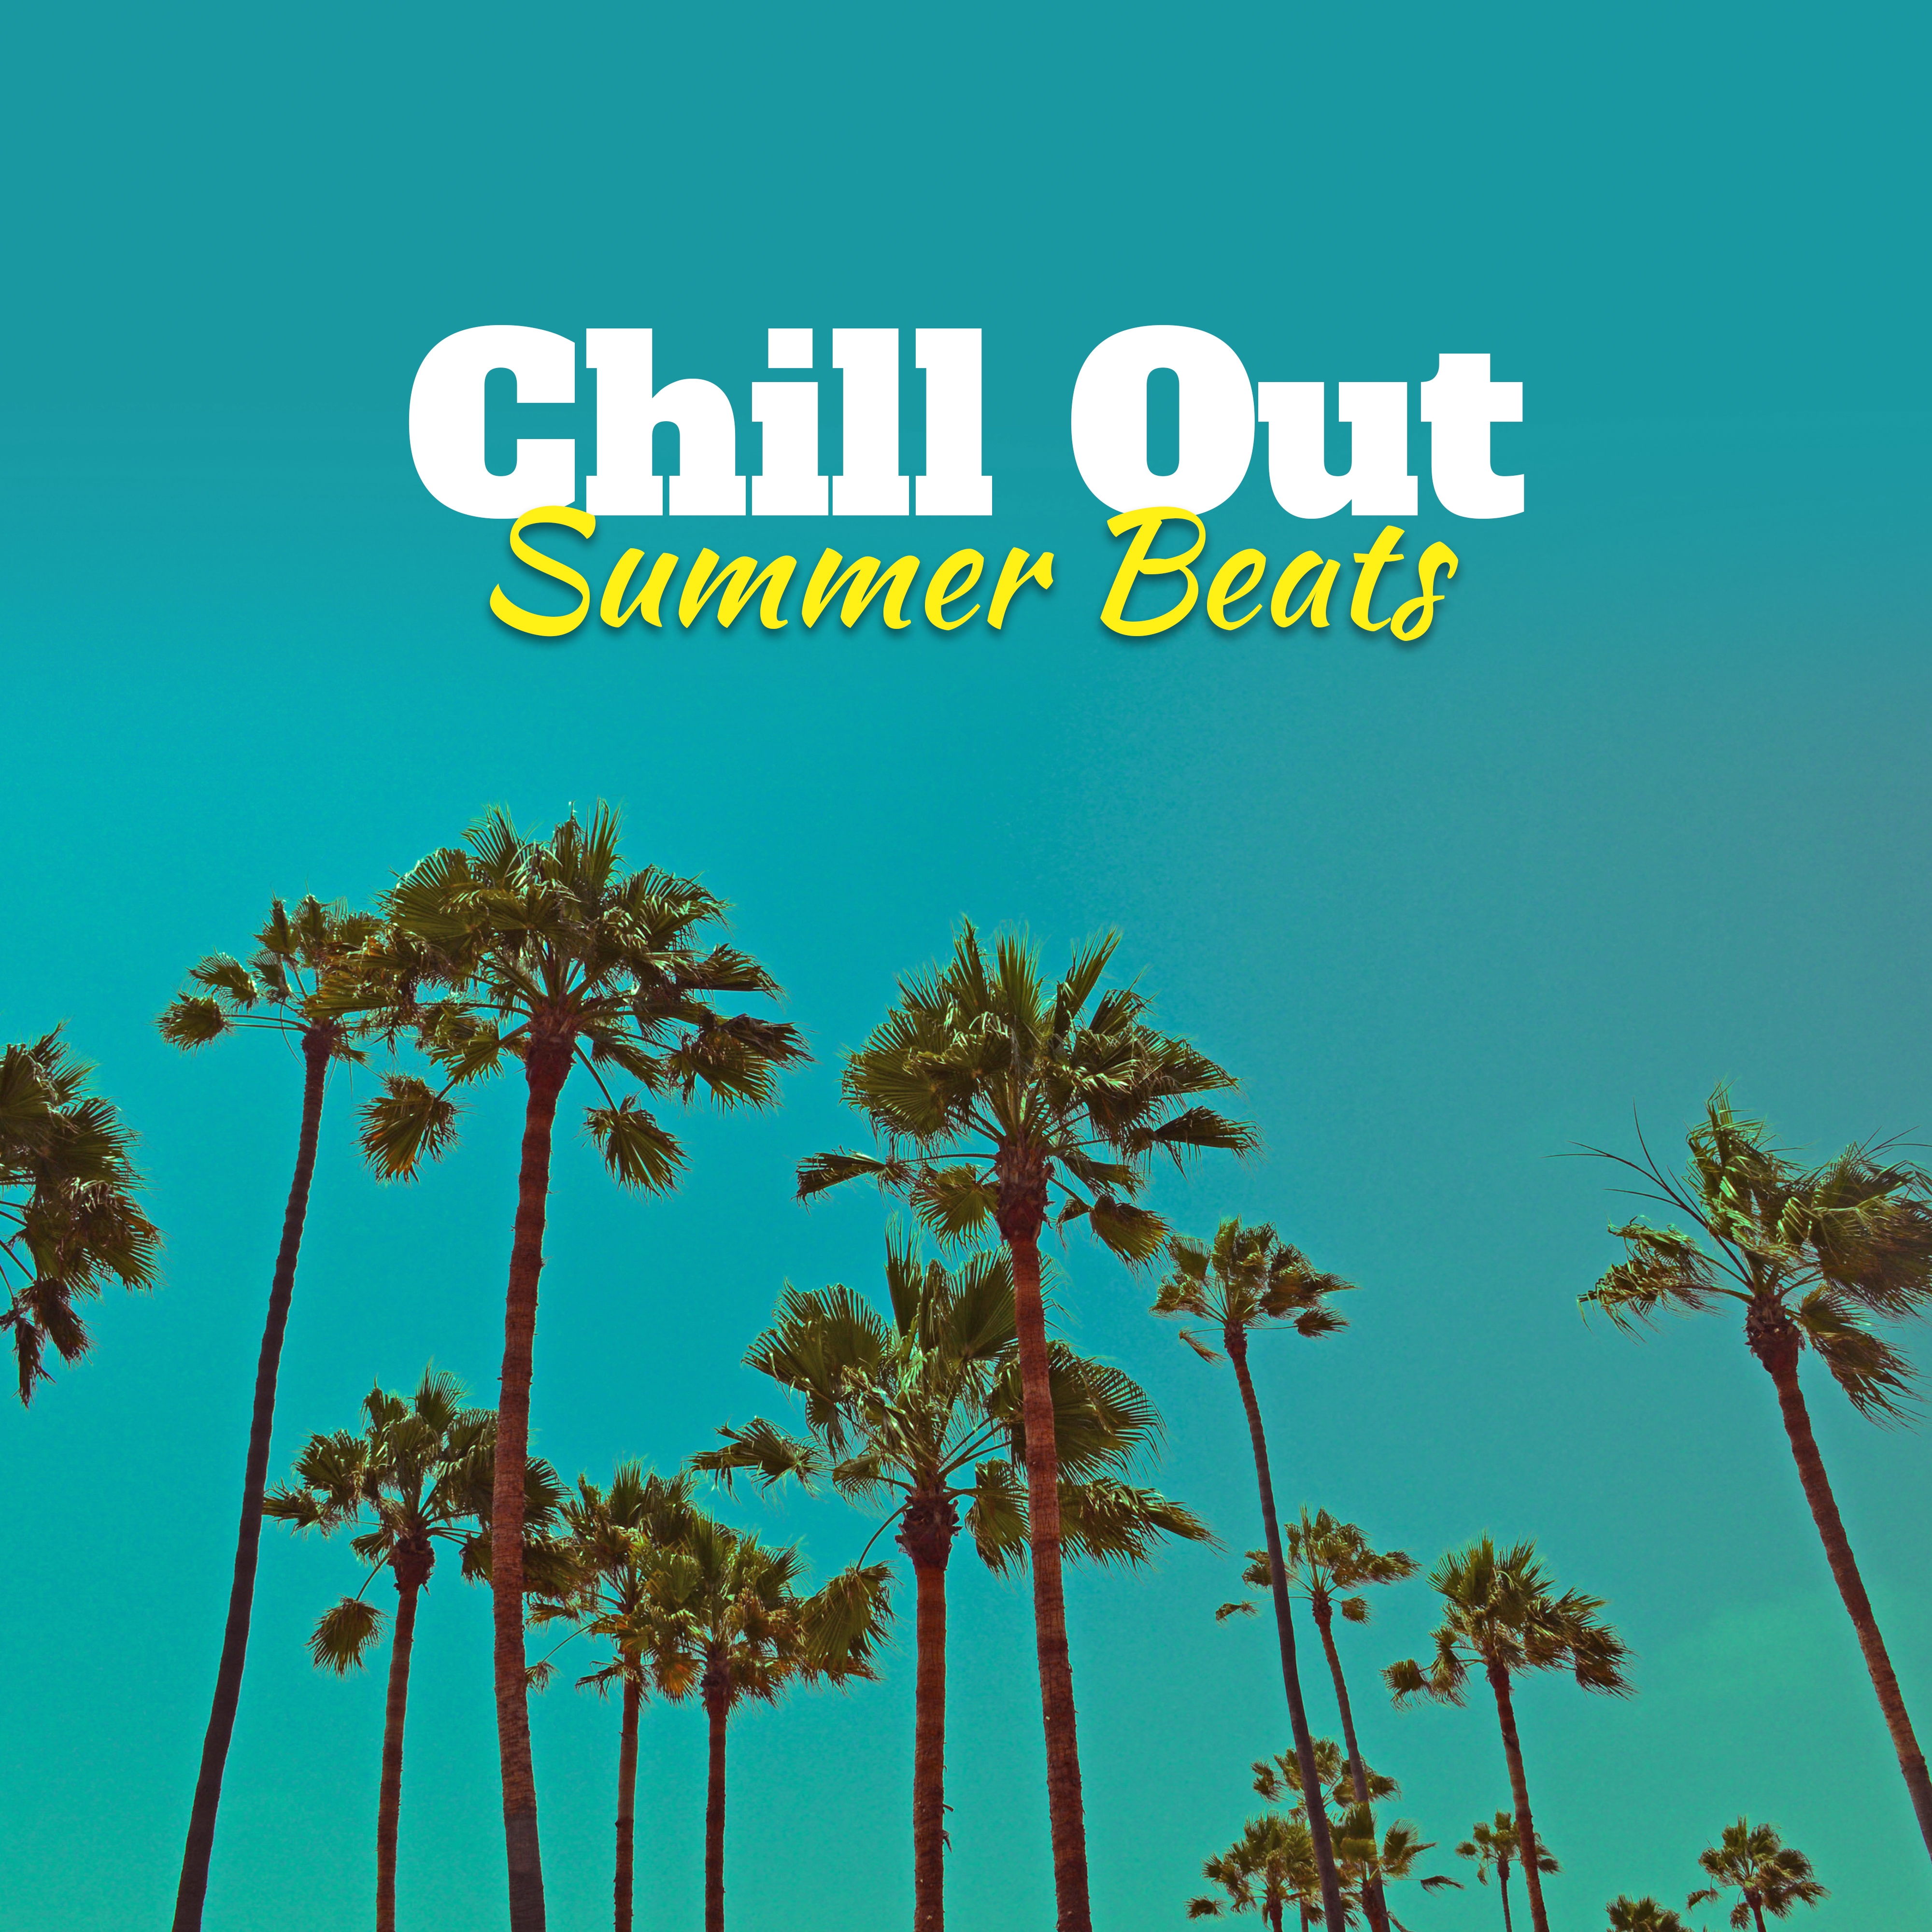 Chill Out Summer Beats – Best Chill Out Vibes, Summer Lounge, Beach Music to Relax, Soft Sounds